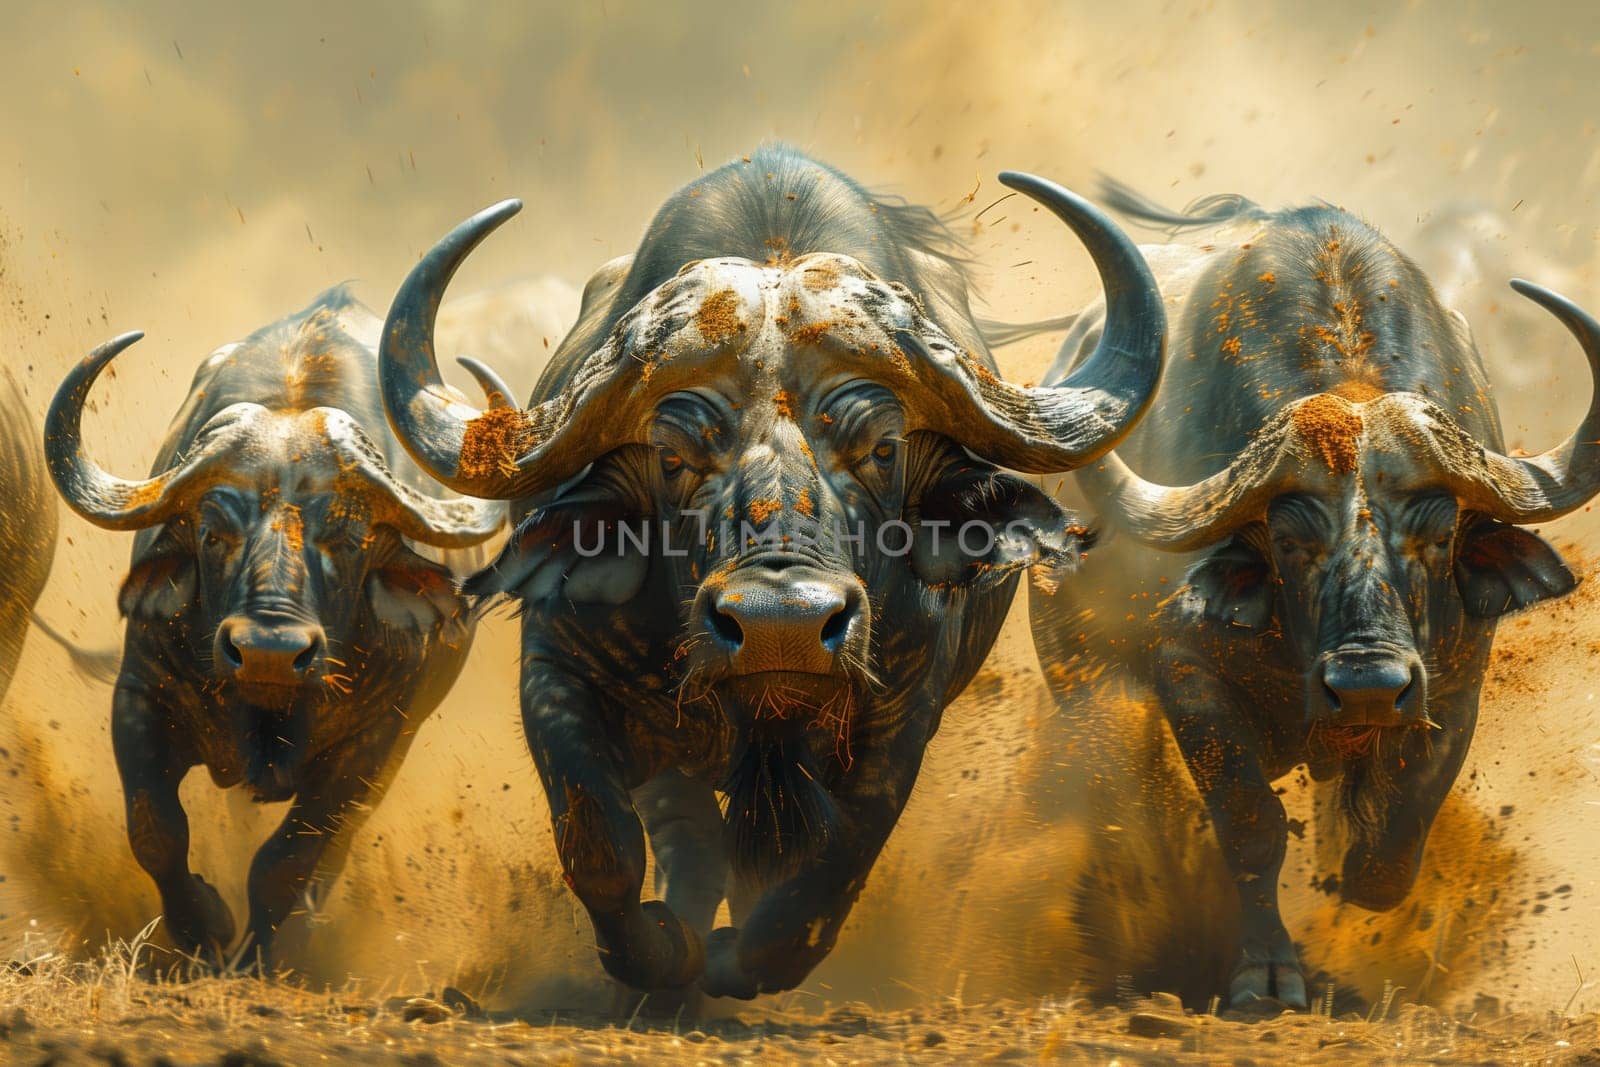 A herd of water buffalo with horns sprinting across a dusty field by richwolf